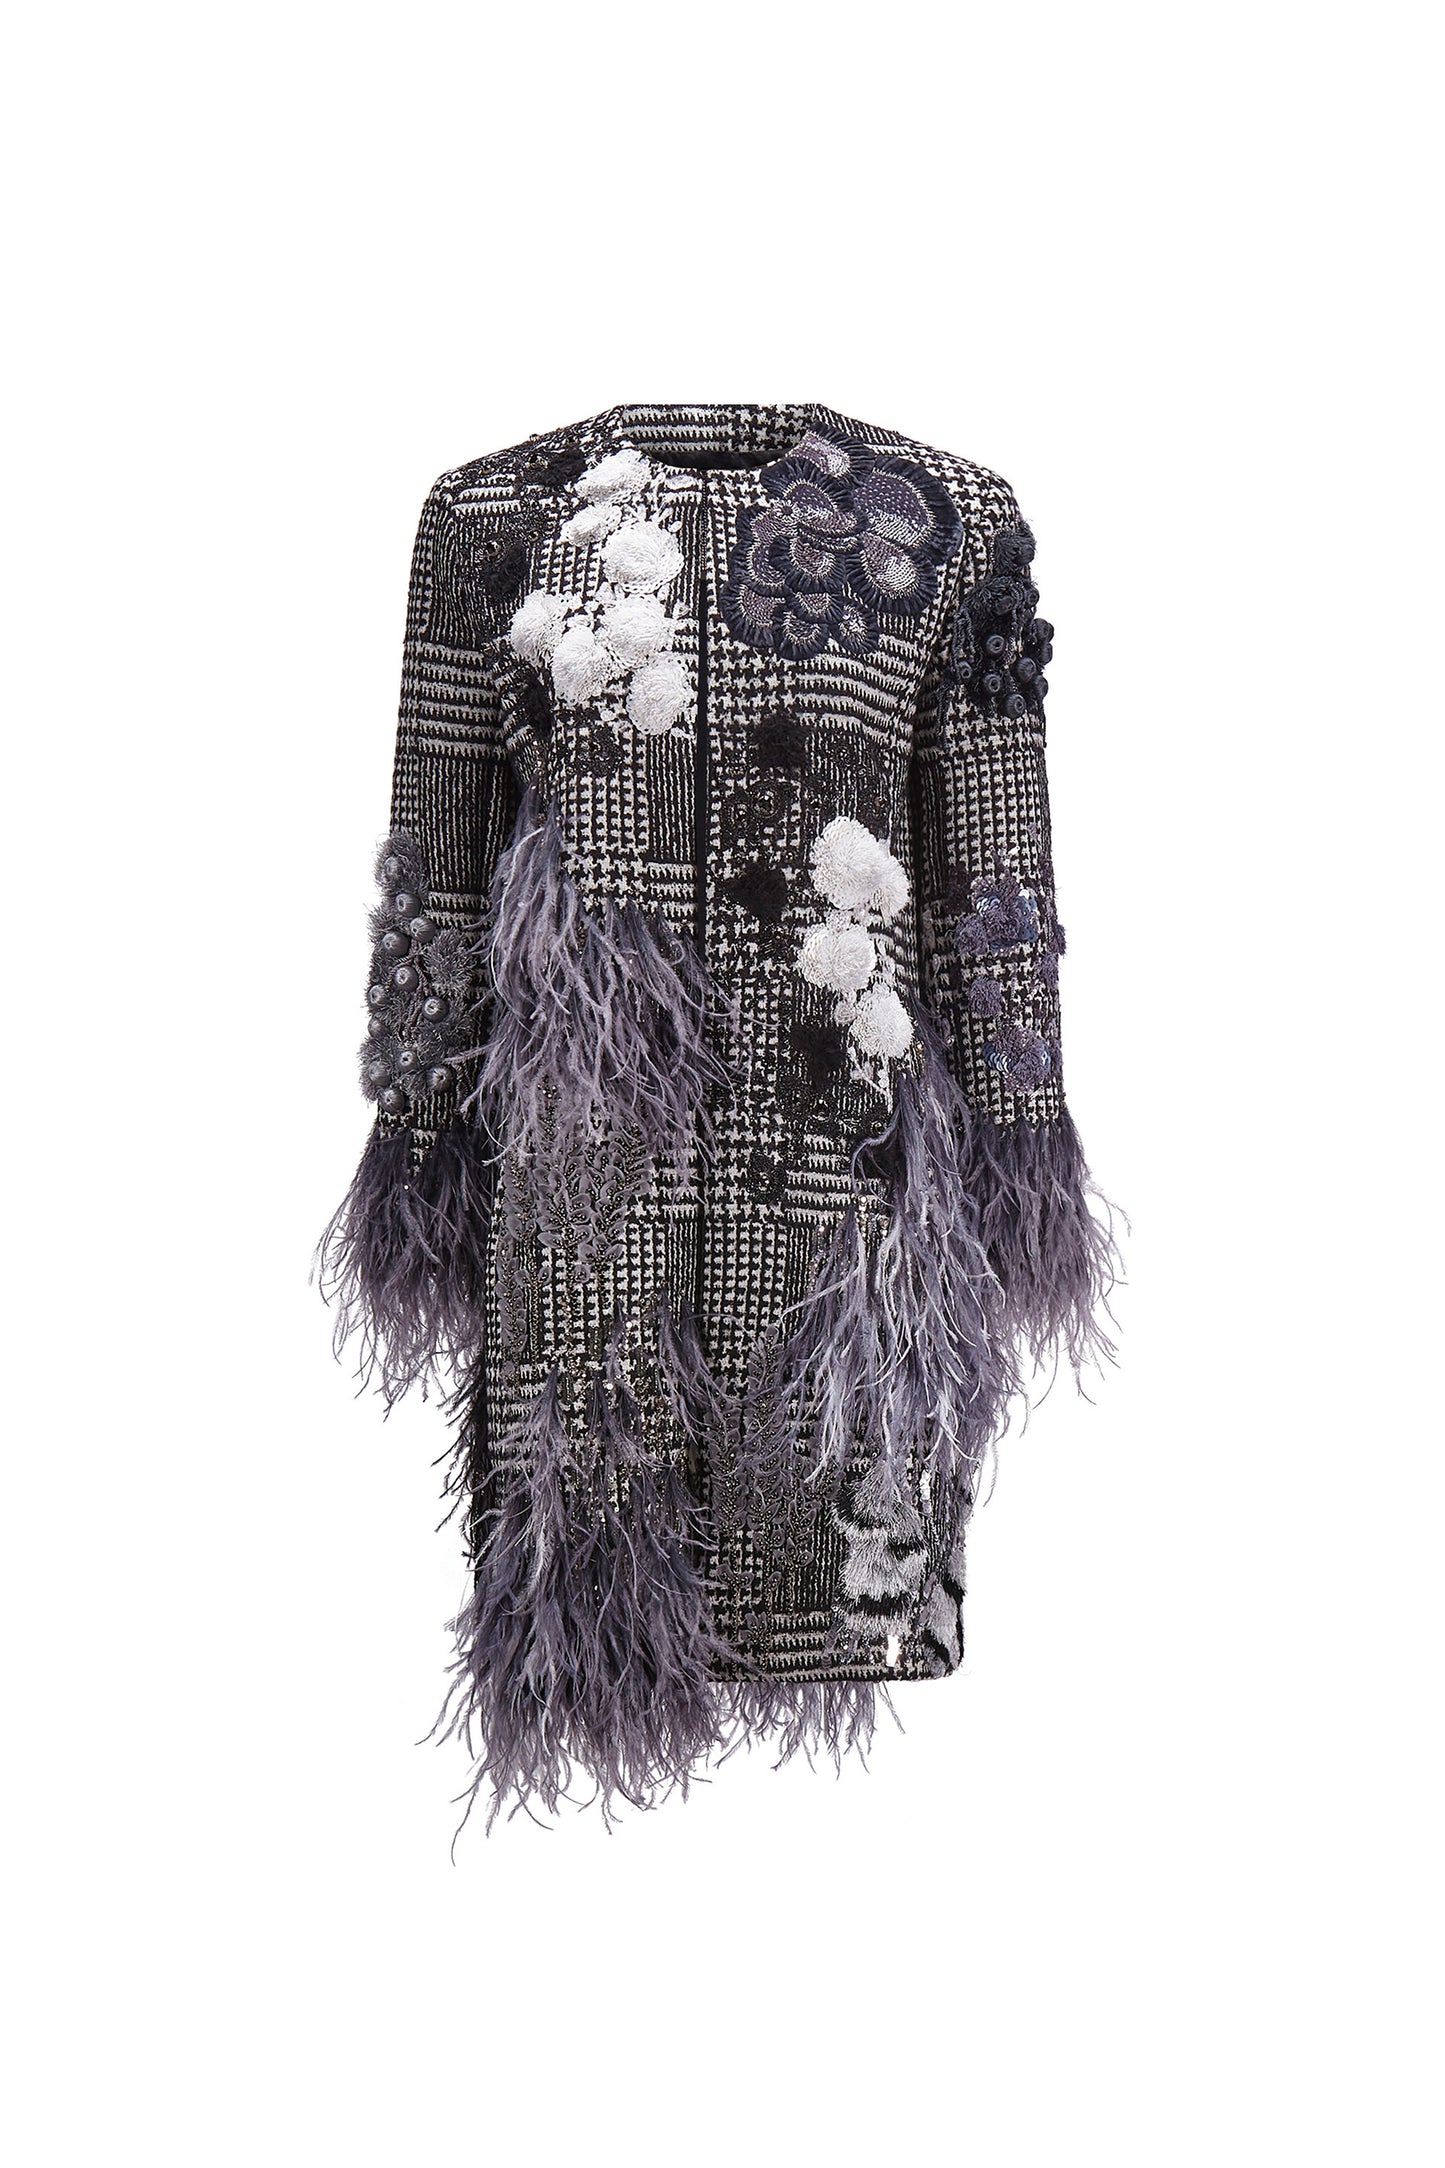 'GLAM ROCK' CLASSIC COLLARLESS COAT WITH FEATHERS -  - Libertine